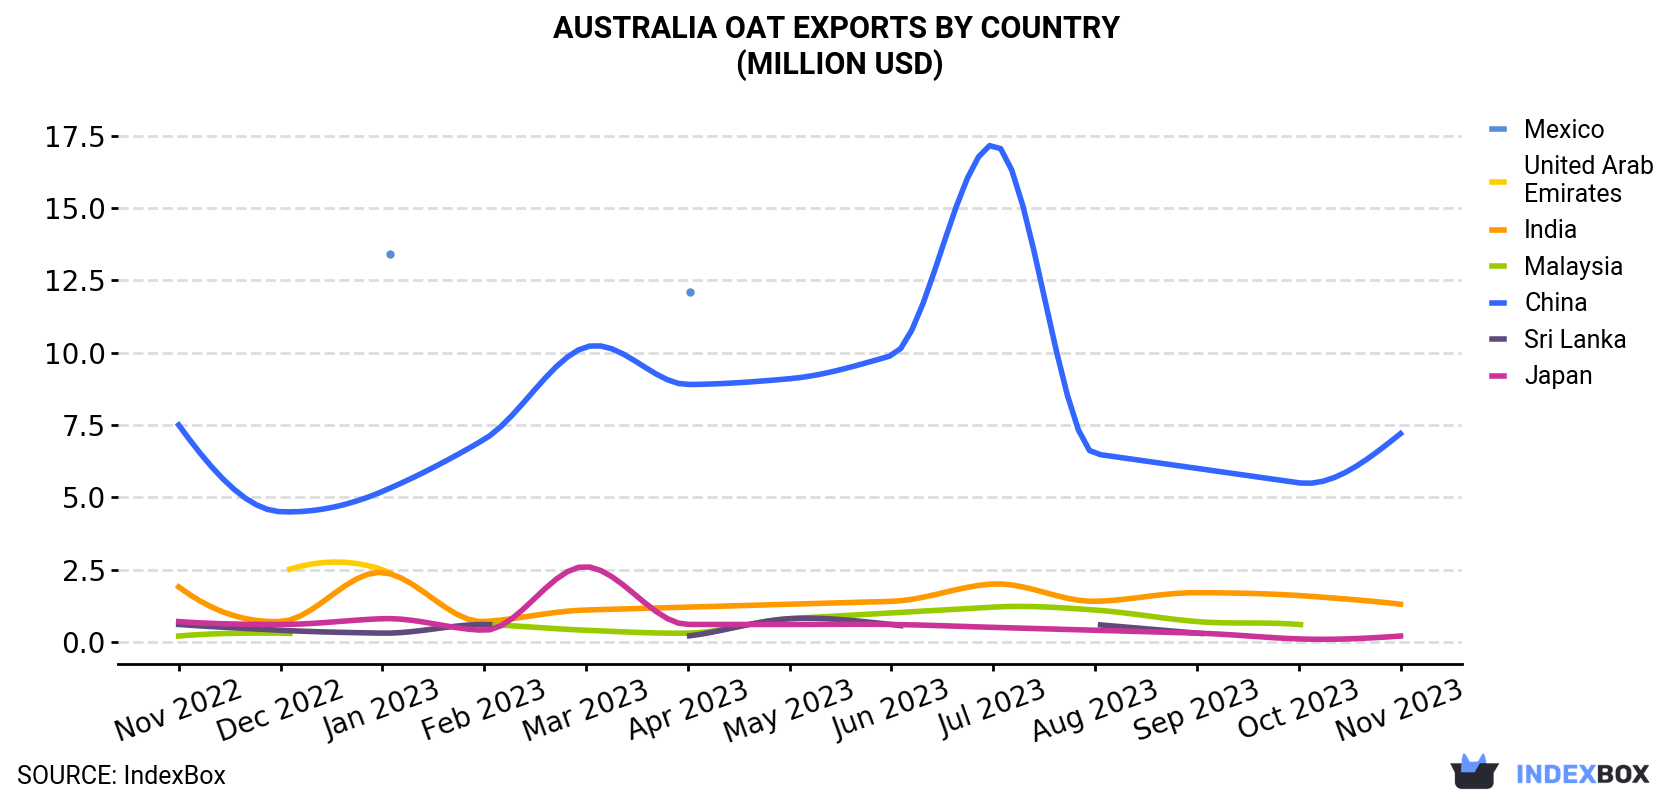 Australia Oat Exports By Country (Million USD)